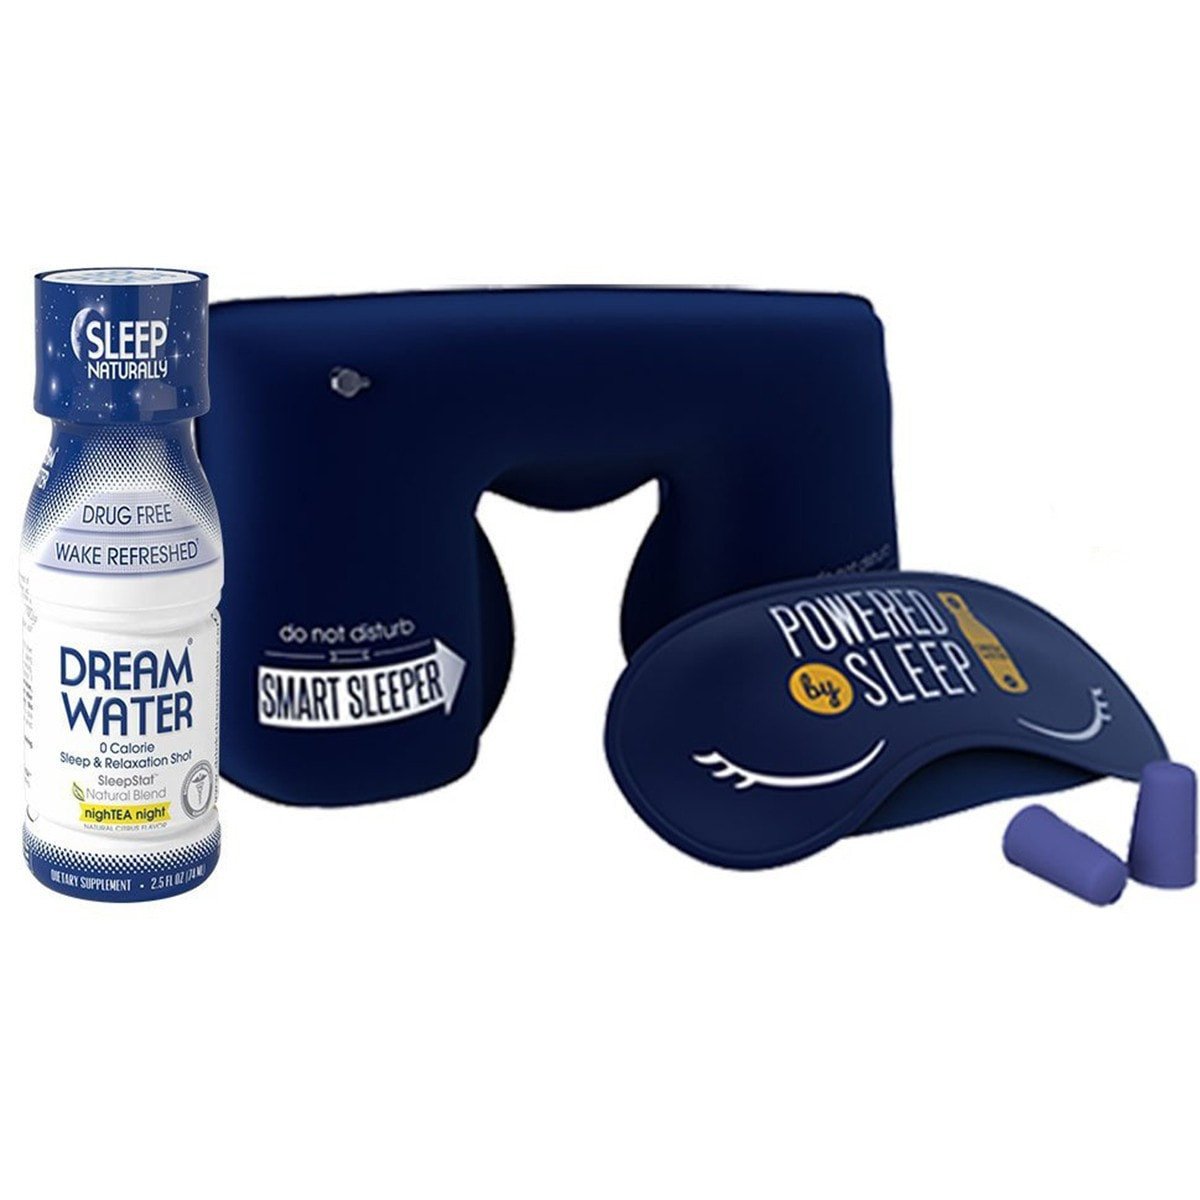 Dream Water Travel Sleep Kit - Perfect Travel Accessory, Product image 2